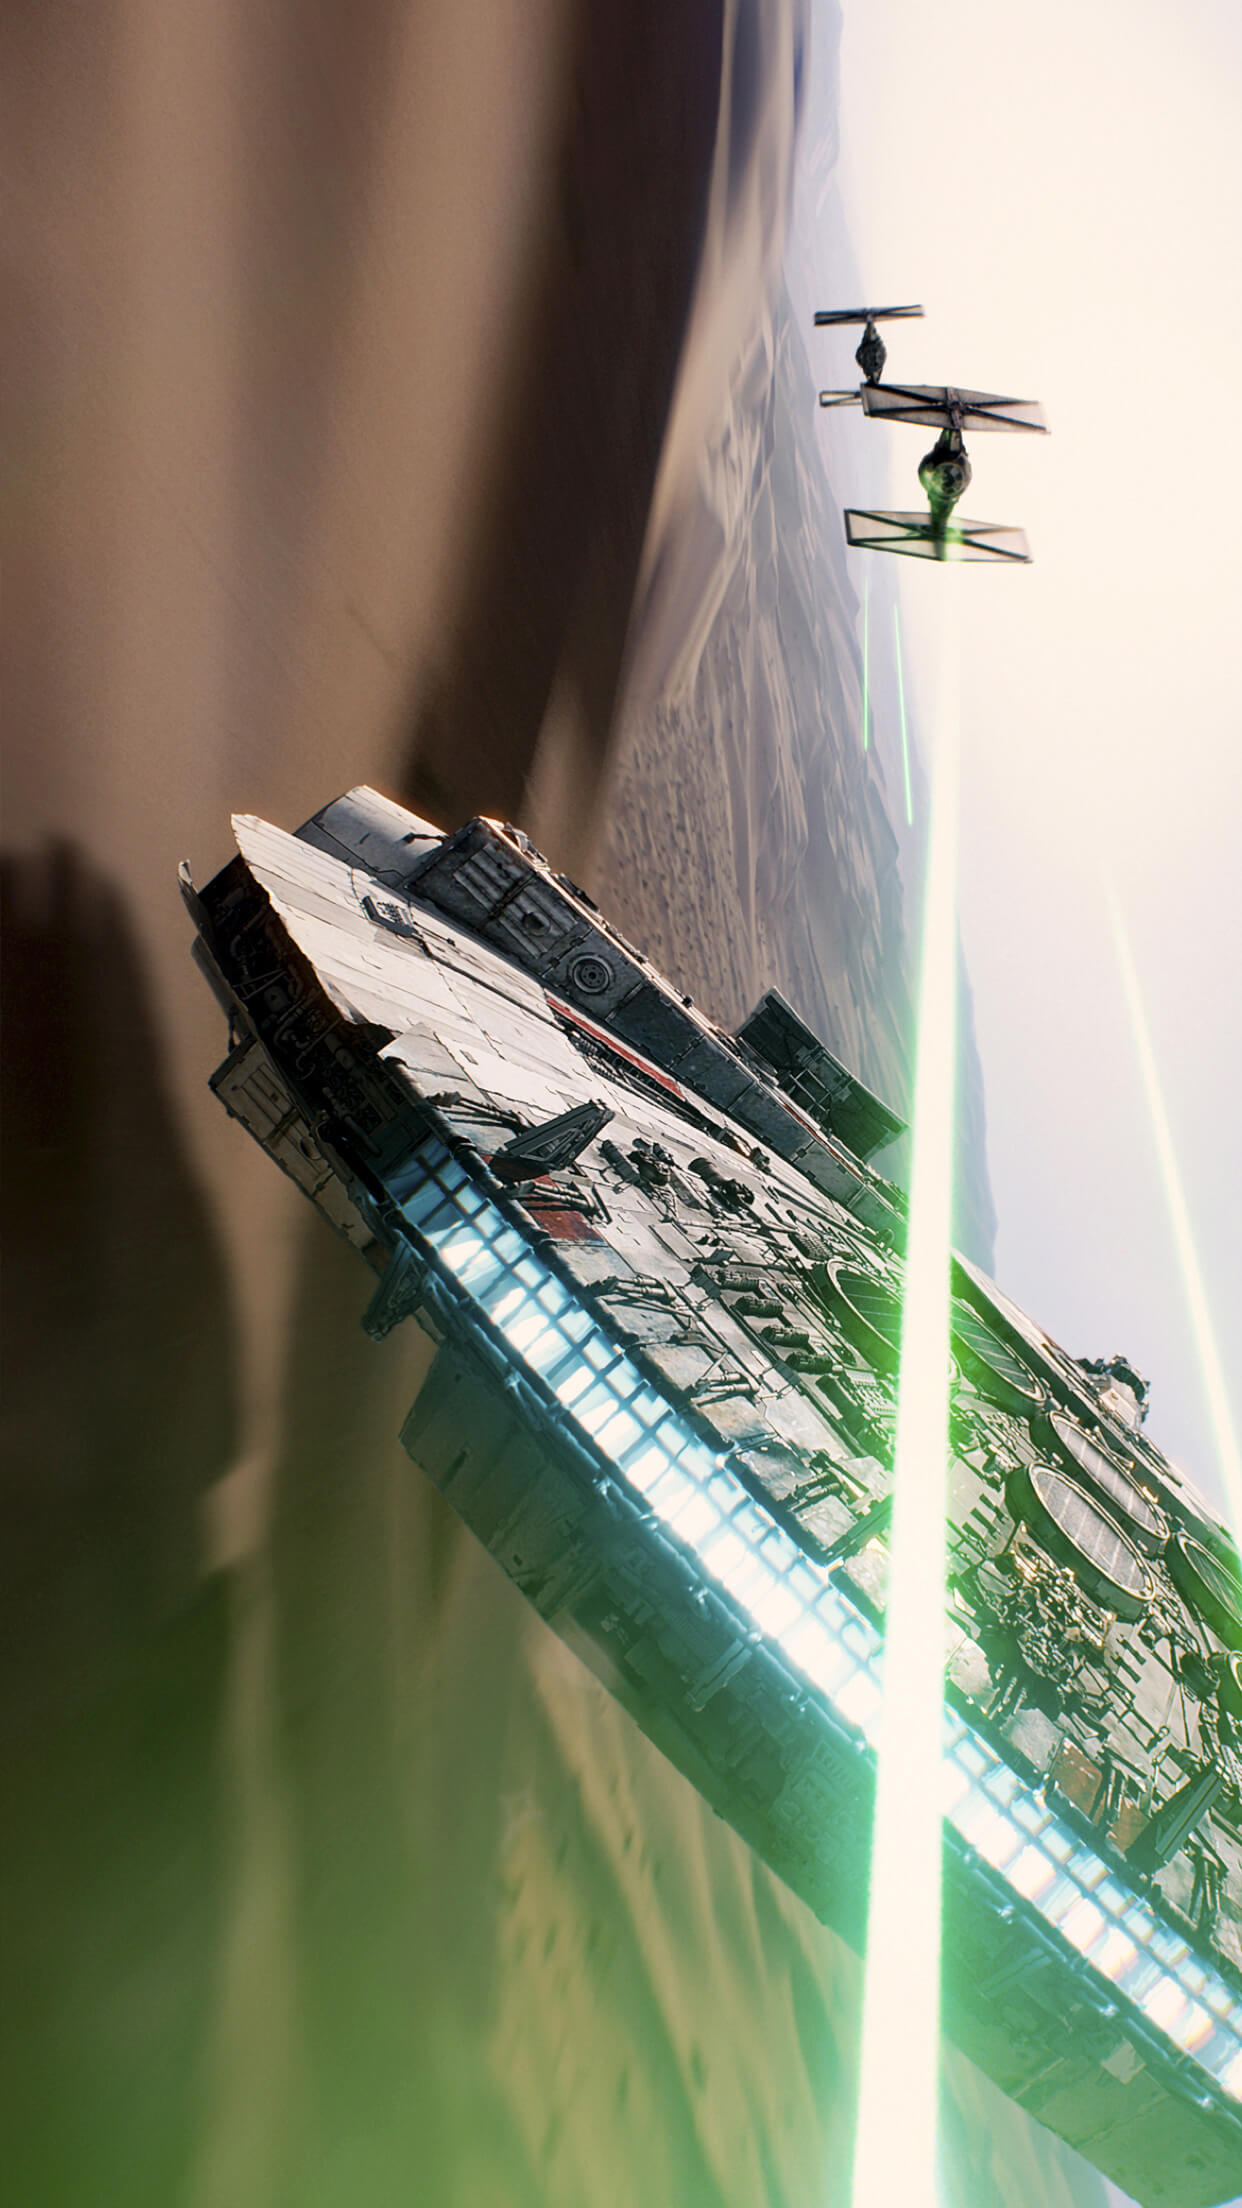 5 Star Wars Wallpapers For iPhone That You Must Download ...